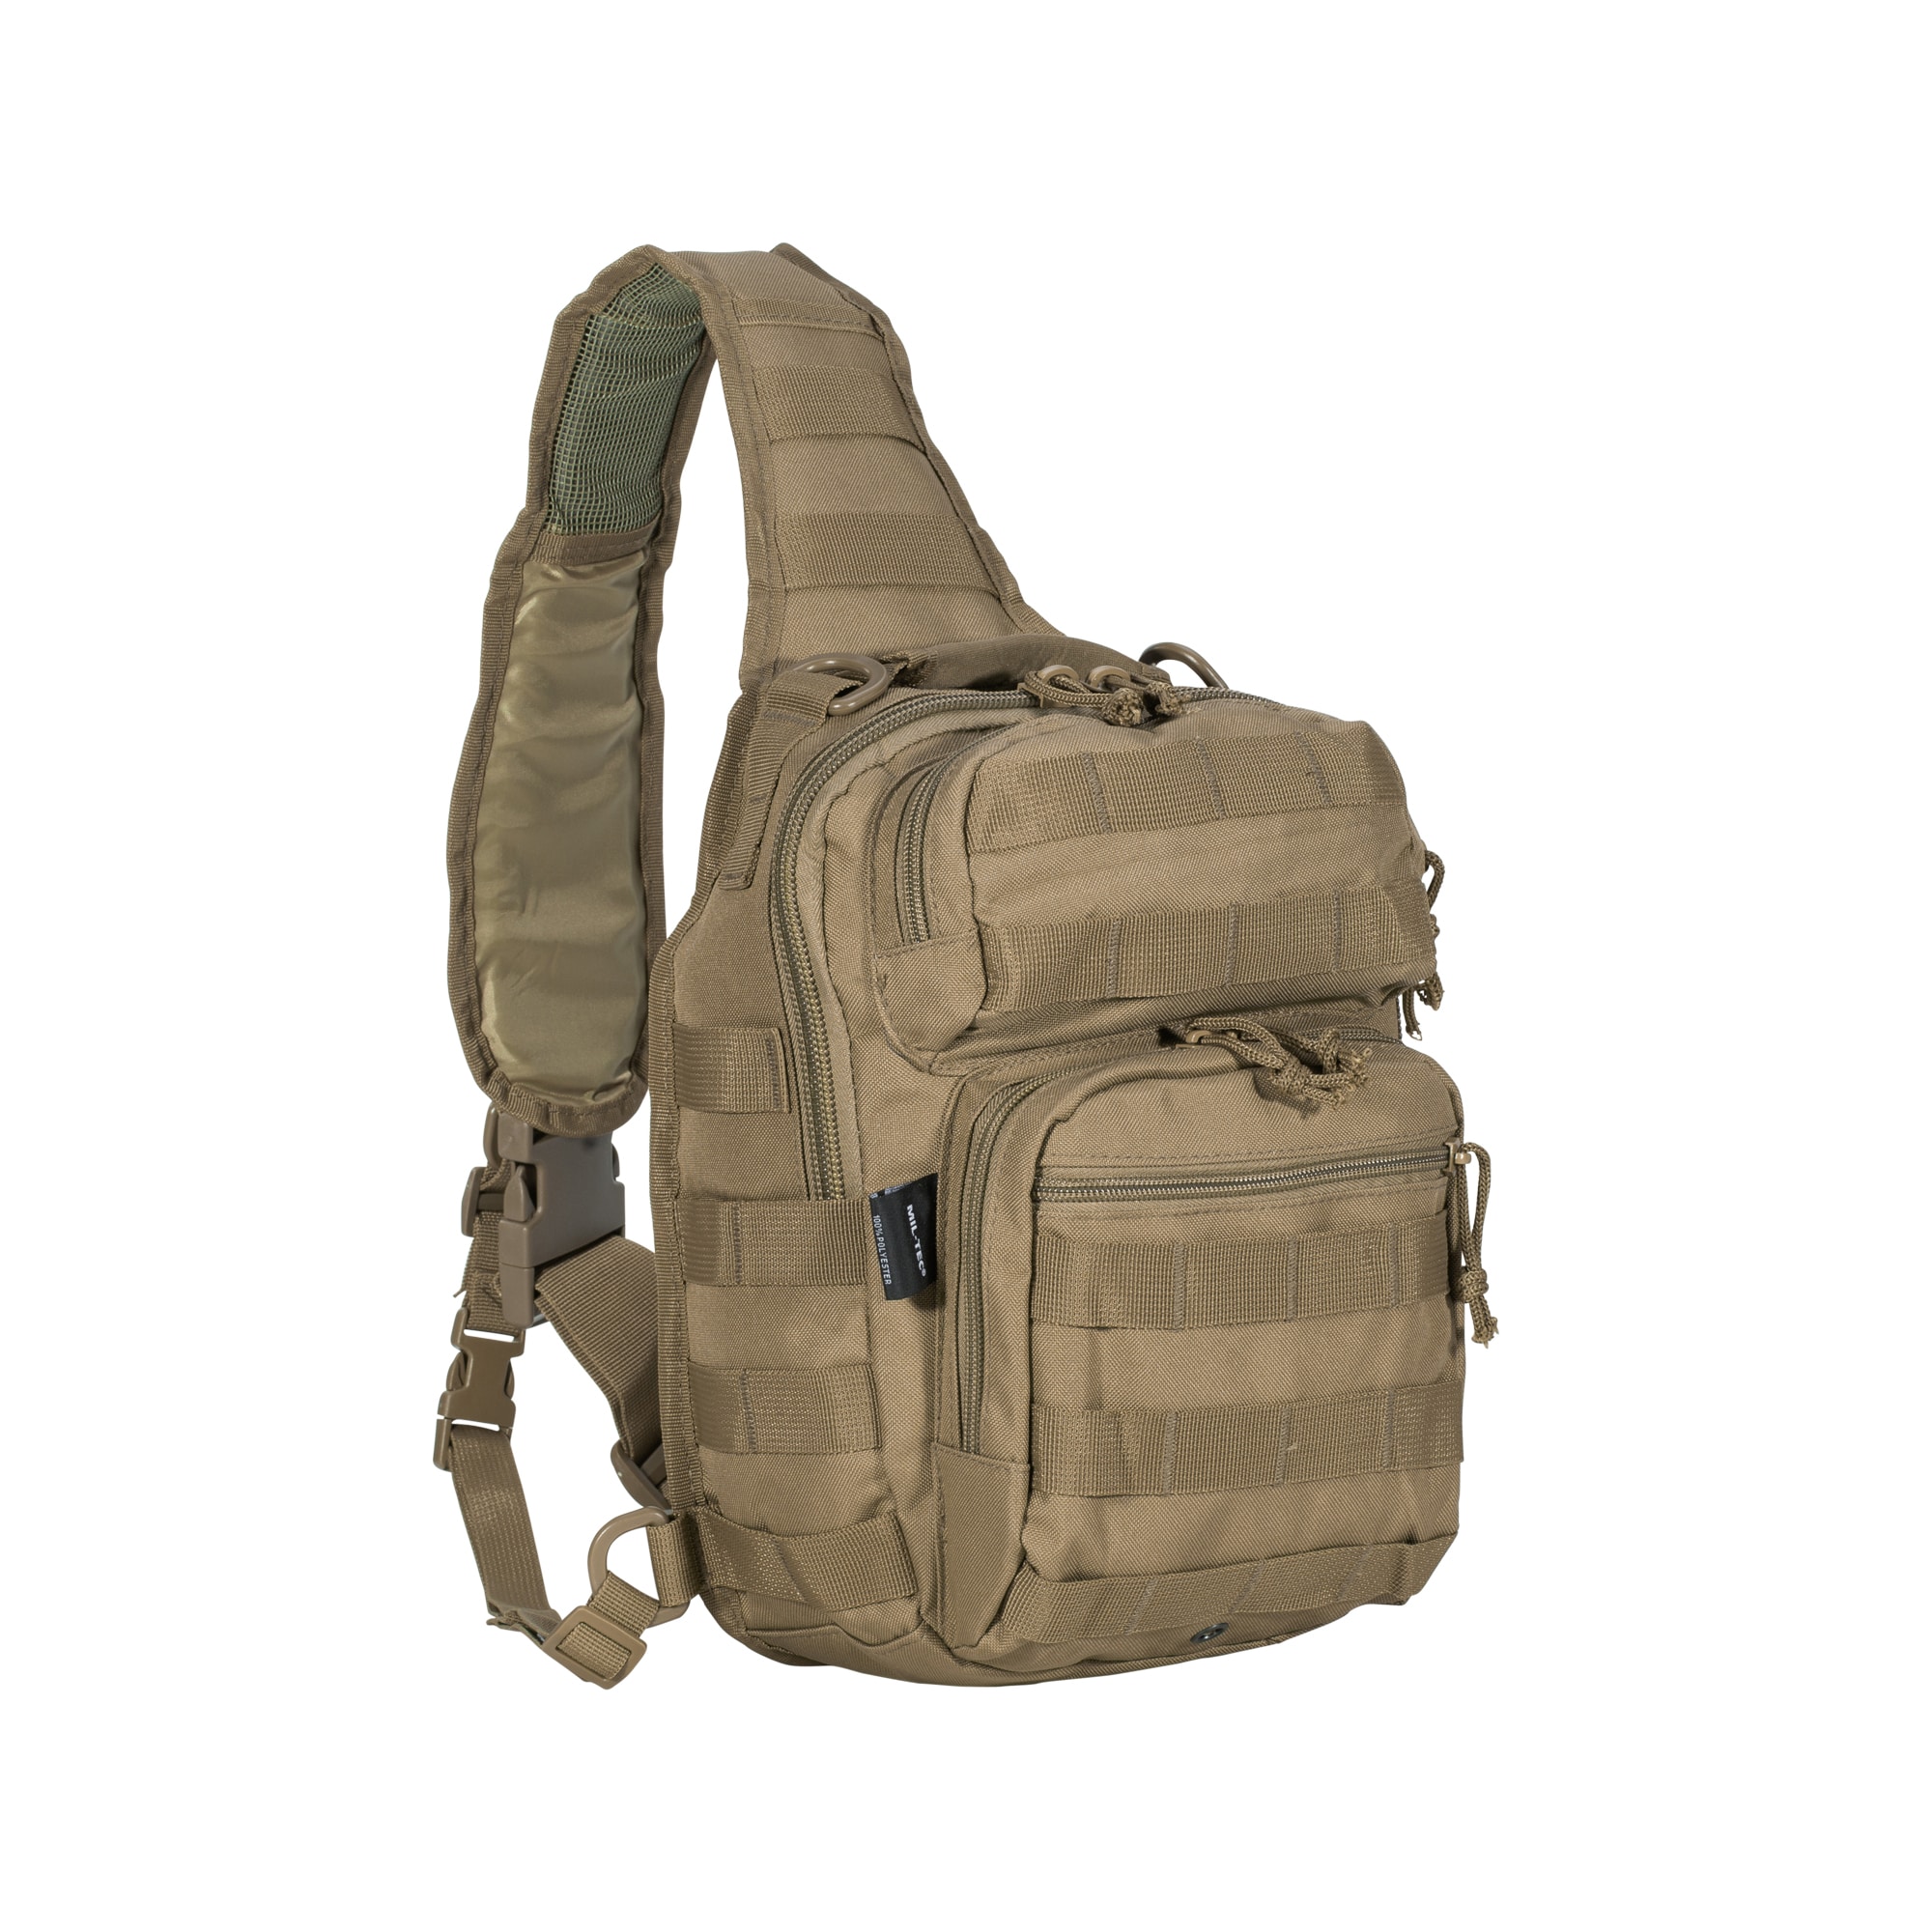 Mil-Tec Backpack One Strap Assault Pack SM coyote | Mil-Tec Backpack ...